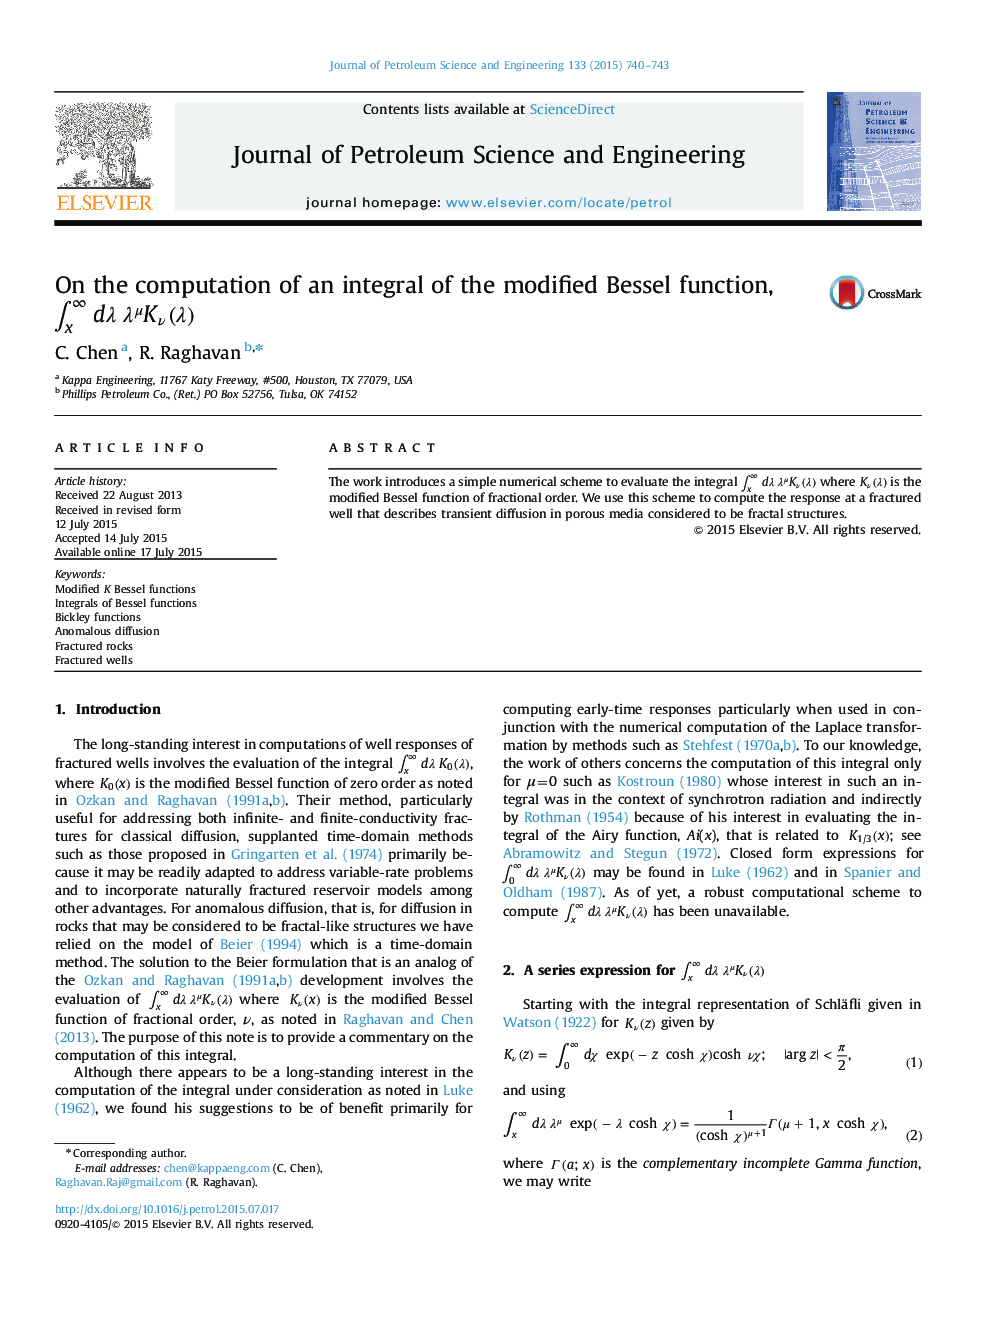 On the computation of an integral of the modified Bessel function, ∫x∞dλλμKν(λ)